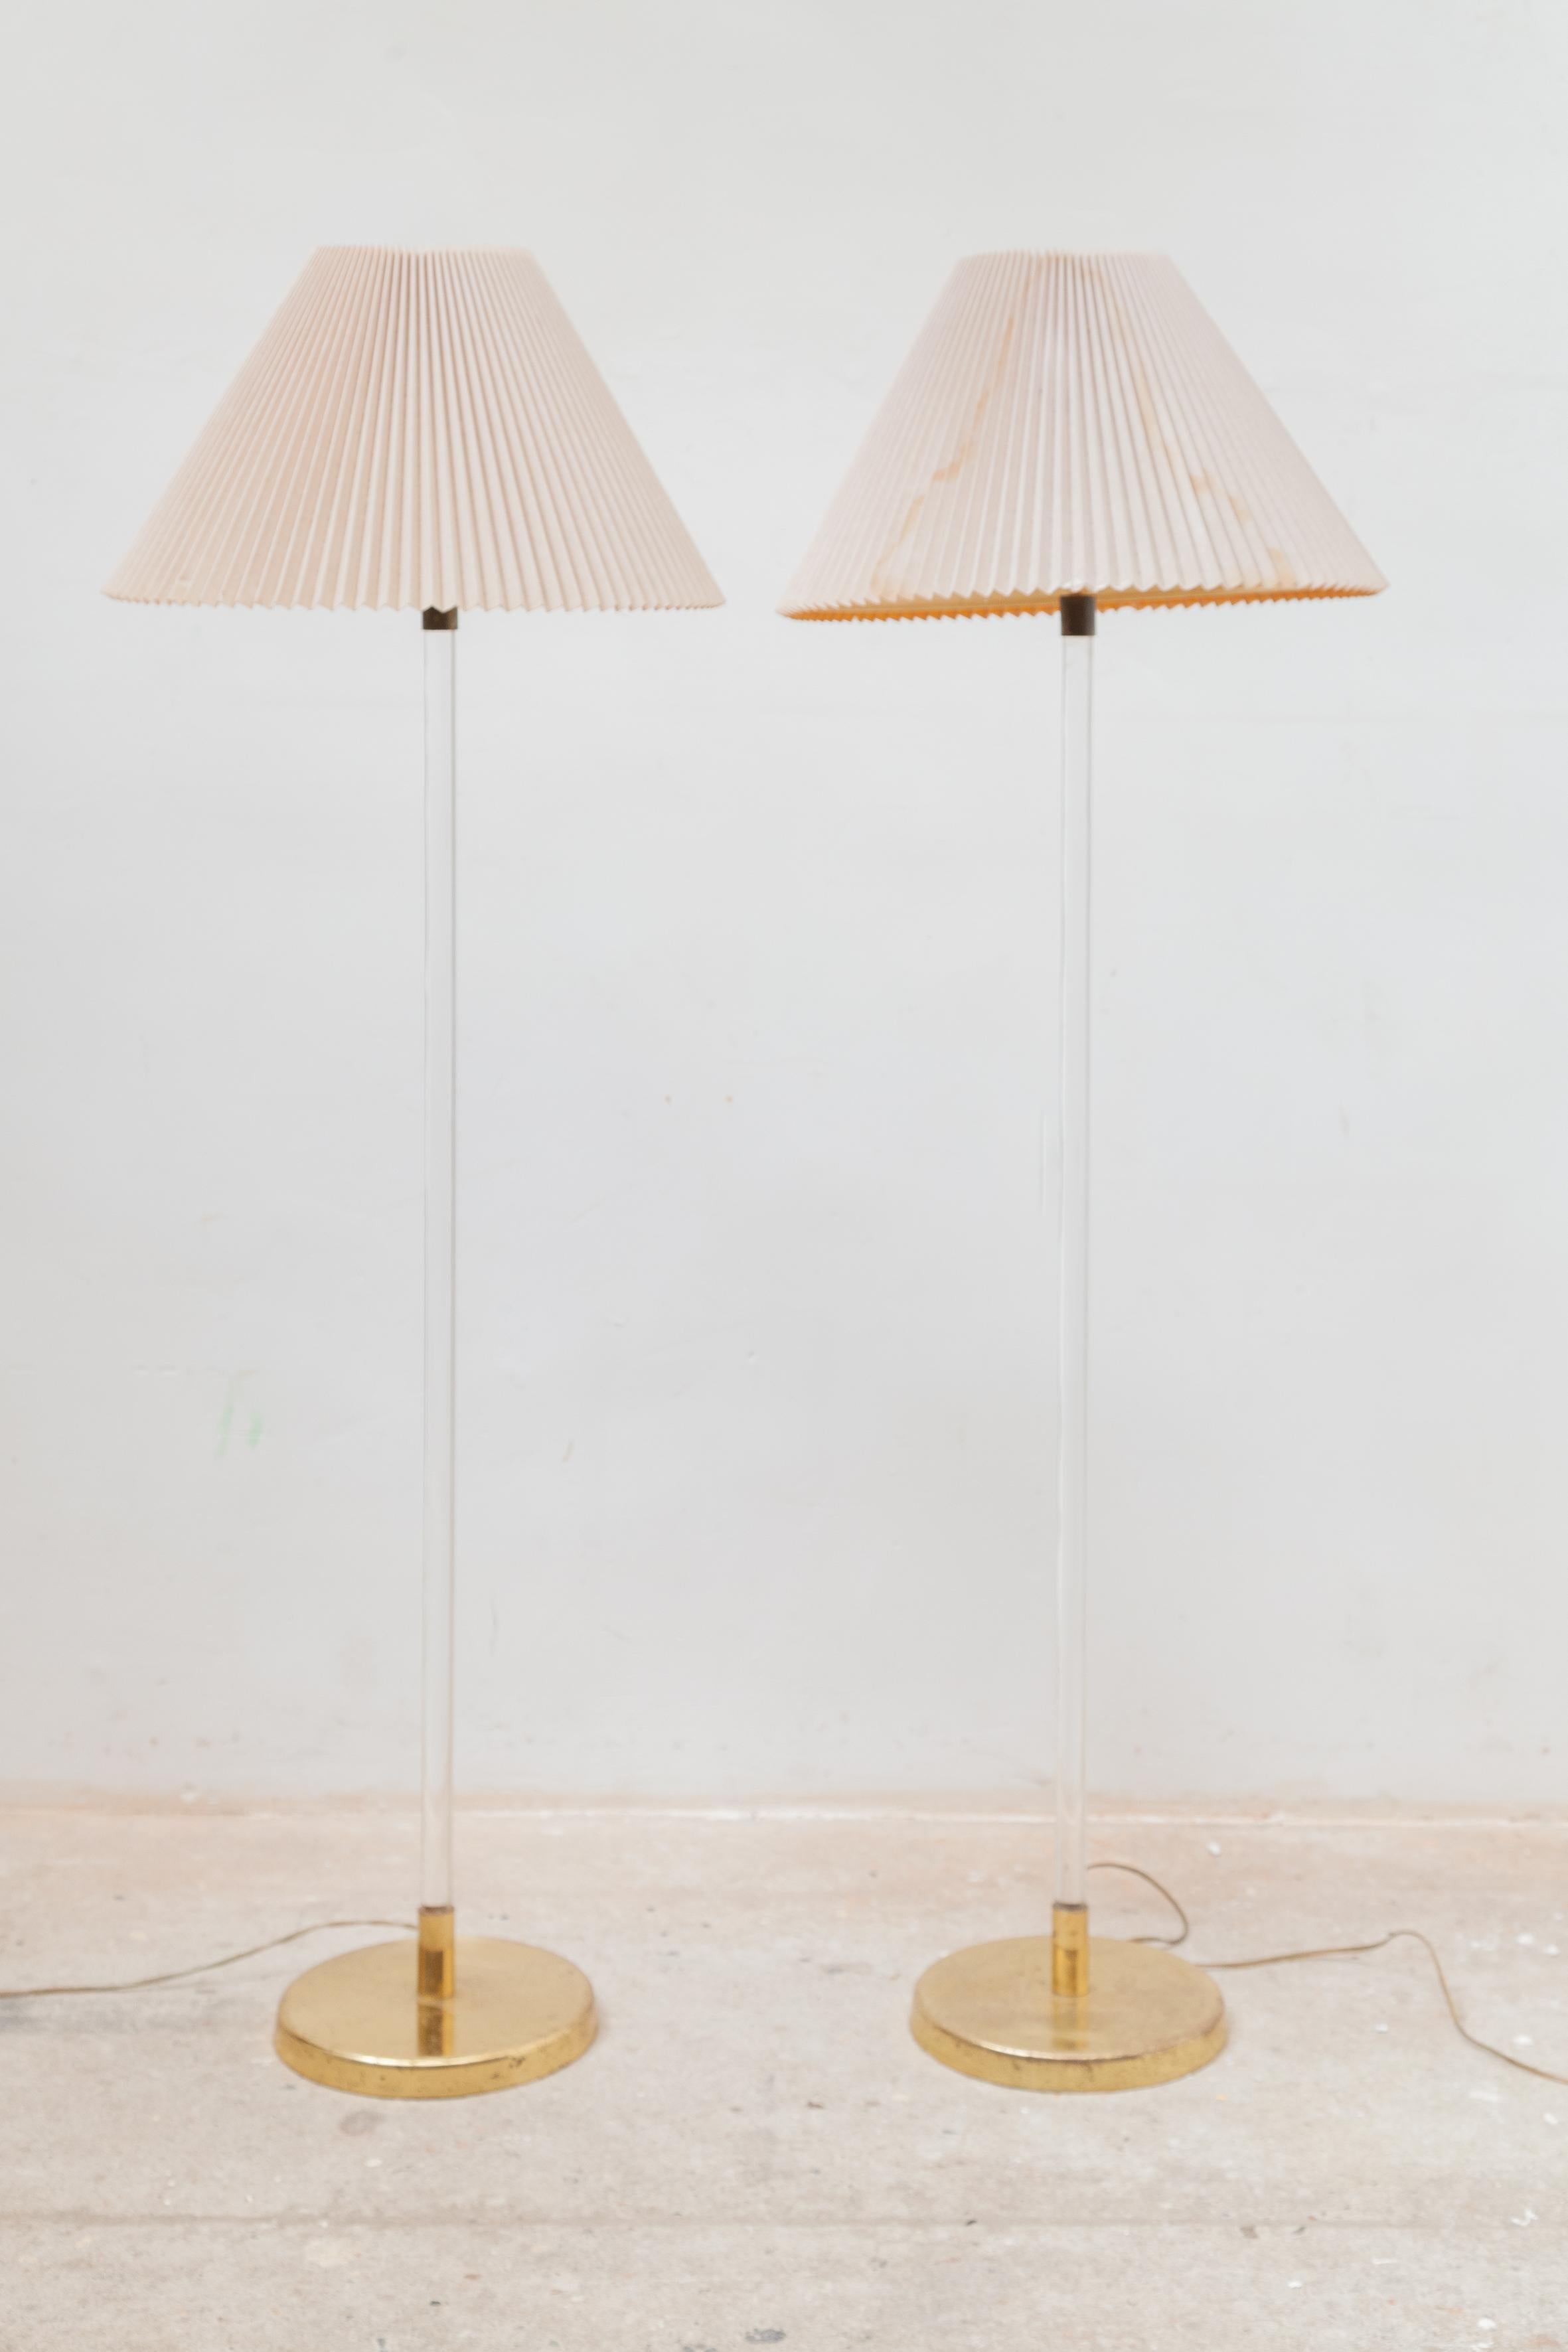 A pair rare floor lamps designed by Peter Hamburger for Knoll, 1970's. The base in brass connected with the stand is made of a clear lucite rod which gives a stately effect to the floor lamps.
The light works well with LED or filament bulbs. The